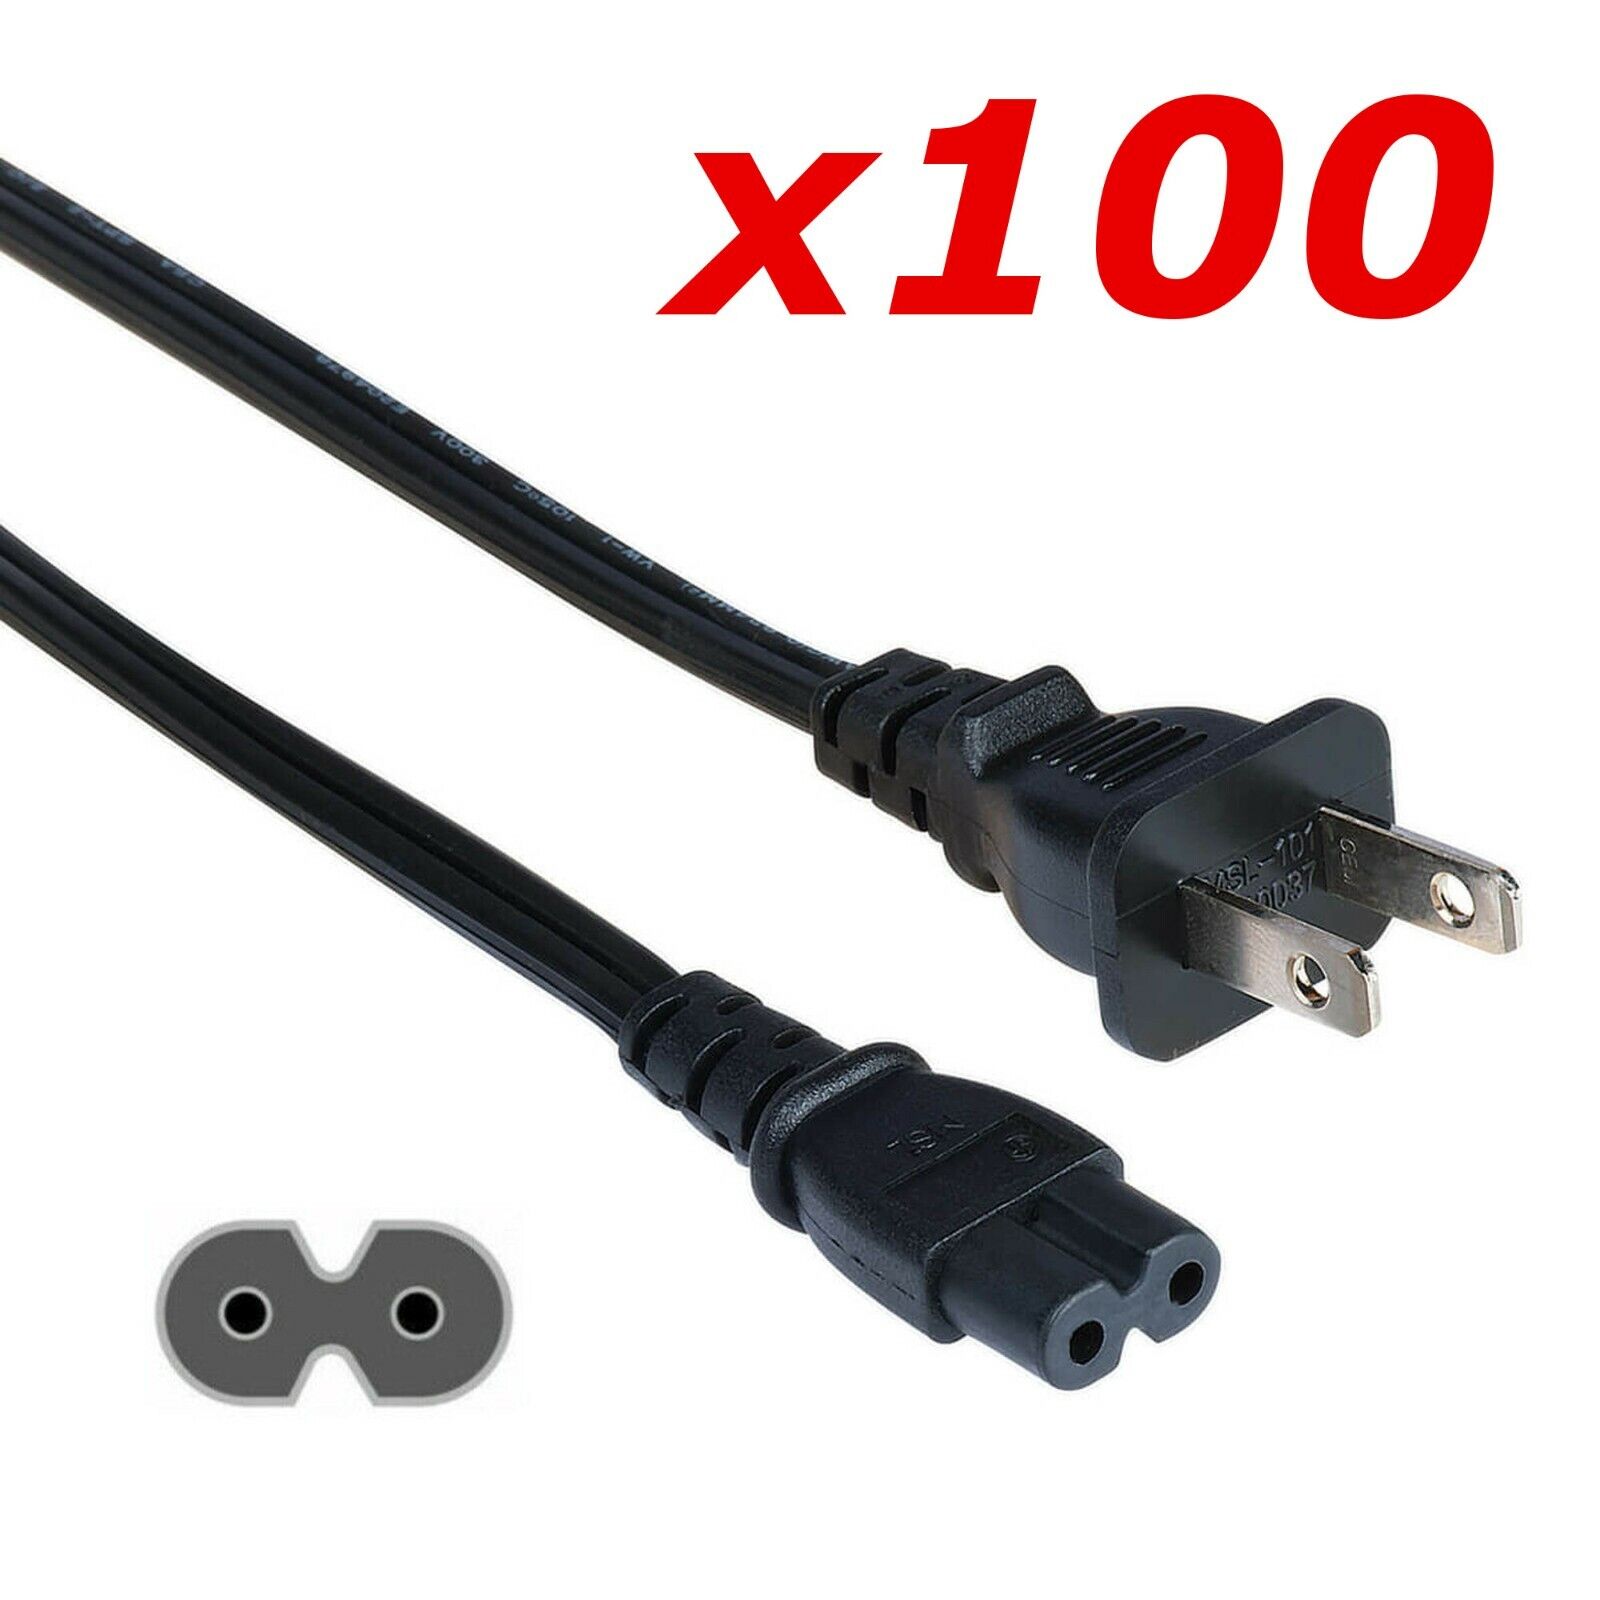 100 Pack 6ft Two Prong AC Power Cord Cable NEMA 1-15P C7 for Laptop PS3 PS4 DVR